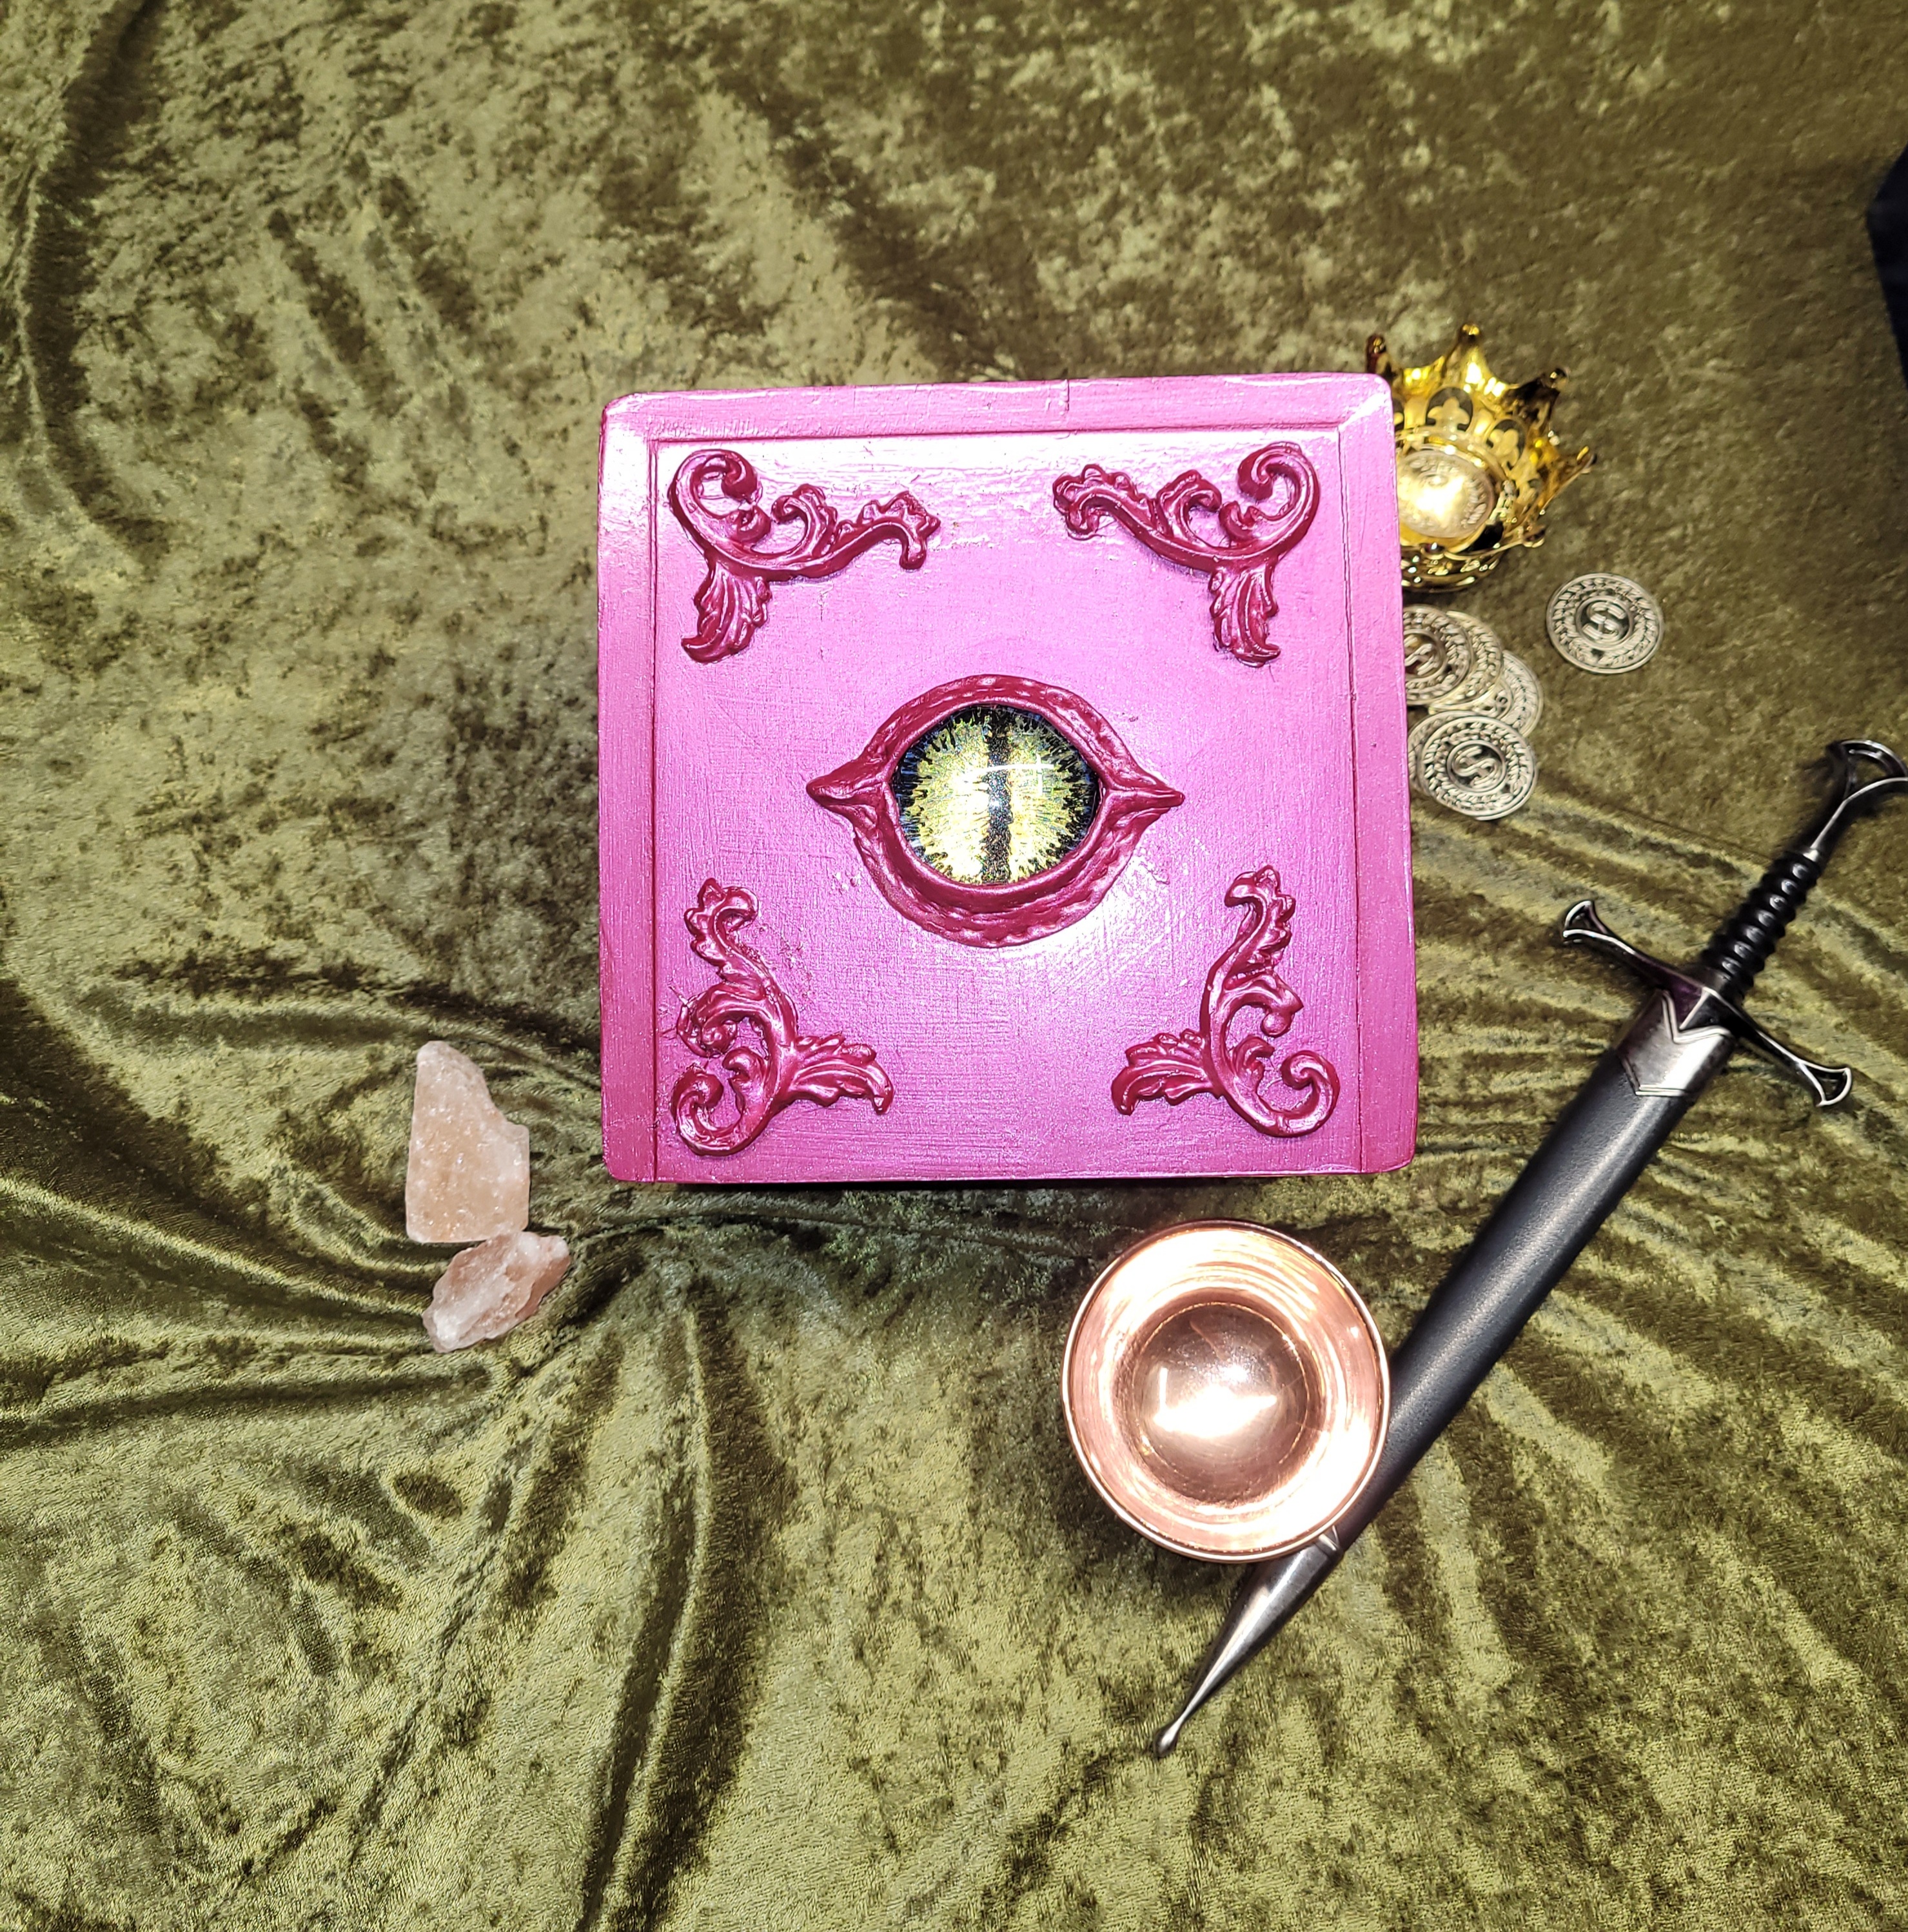 Pink box with Dragon eye & accents